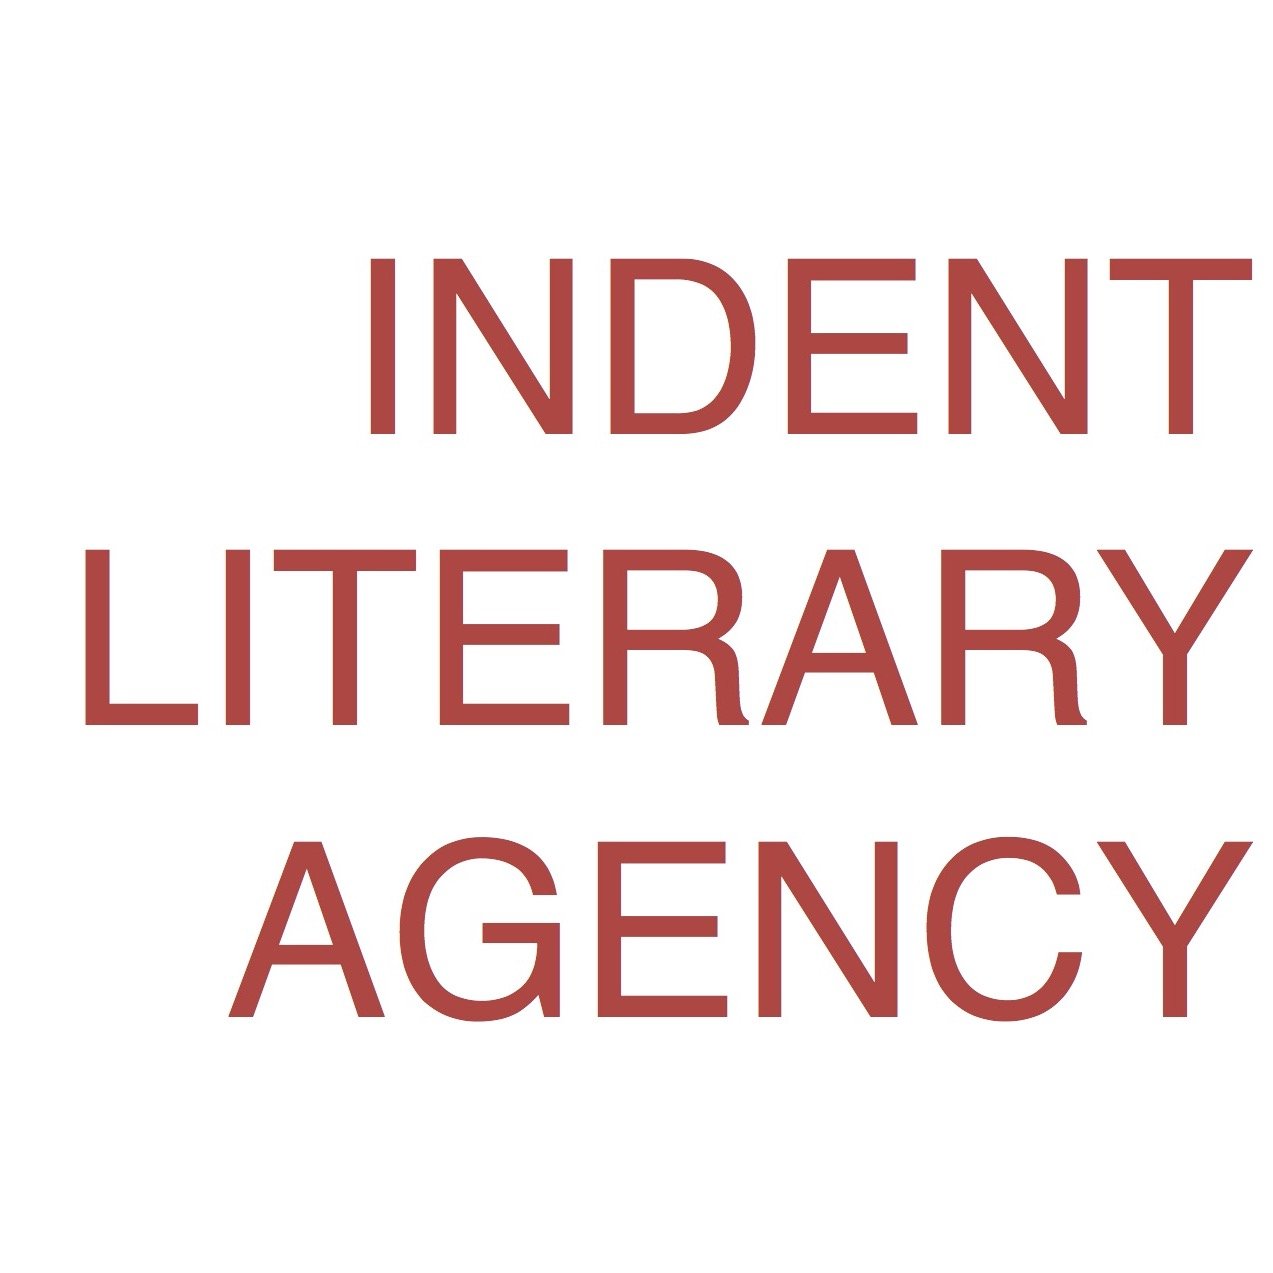 A full-service agency, based in New York City, representing Spanish, English and Portuguese language authors throughout the world.